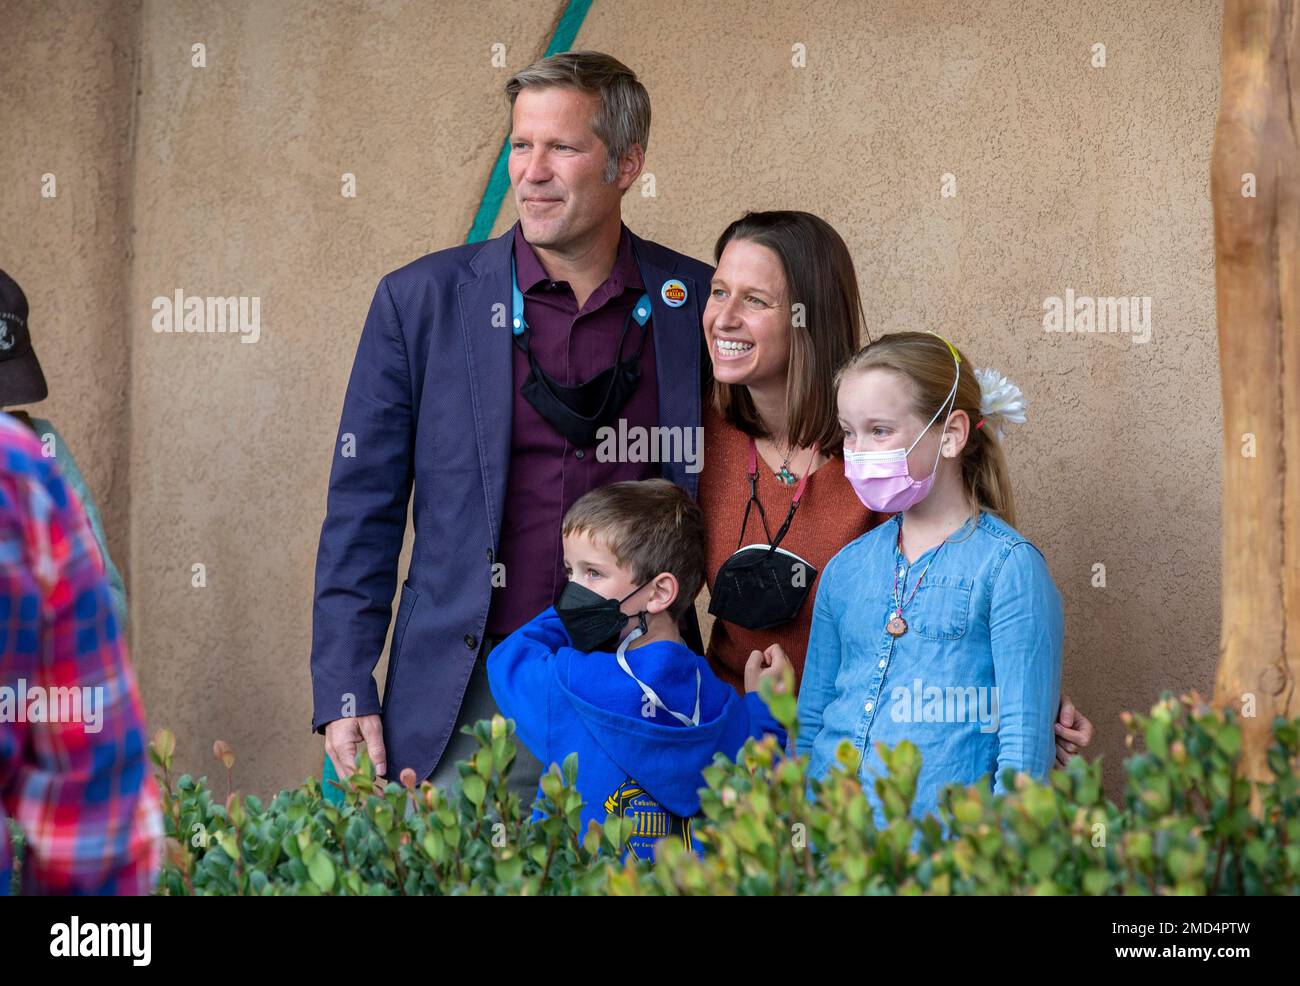 Albuquerque Mayor Tim Keller, left, his wife Elizabeth Kistin, children Maya and Jack are greeted by voters while waiting in line to cast their ballots at a polling place in Albuquerque, N.M. Tuesday, Nov. 2, 2021. Voters in New Mexico's largest city are deciding whether to reelect progressive mayors or to back more conservative challengers within the Democratic Party. (AP Photo/Andres Leighton) Stock Photo